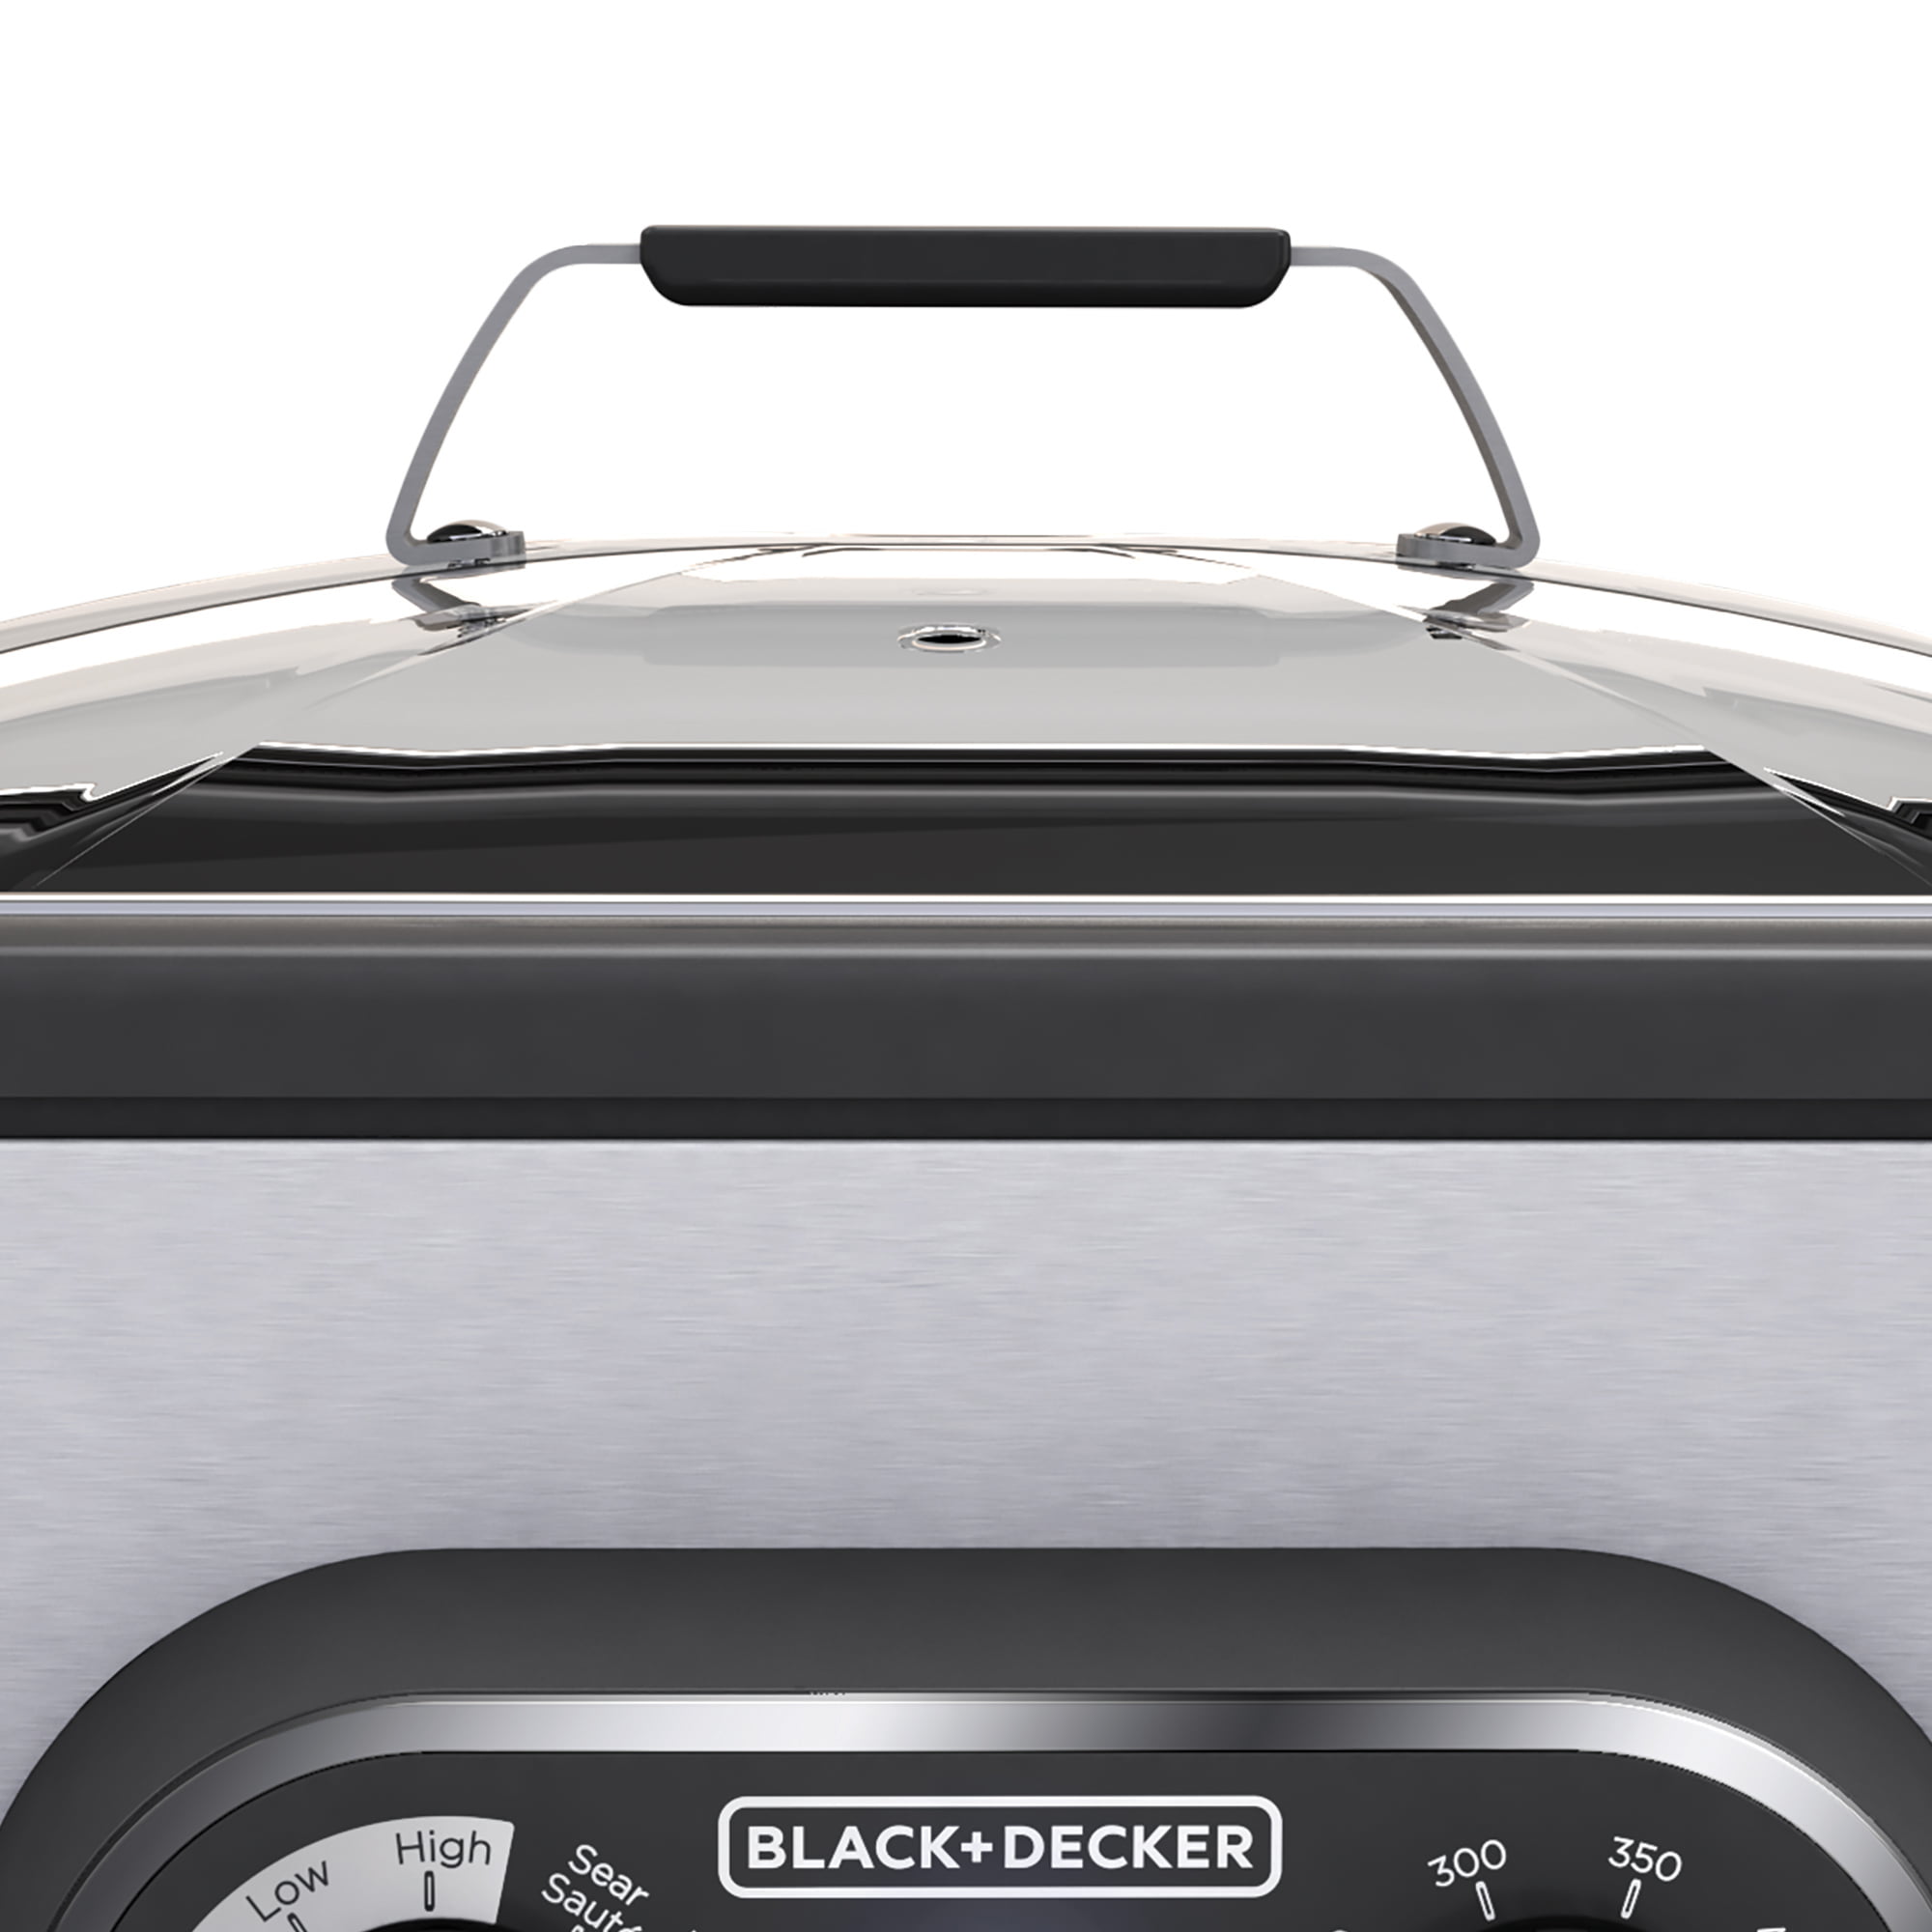 Black+Decker 6.5-Quart Multicooker review: This decent multicooker comes  with a hefty price - CNET